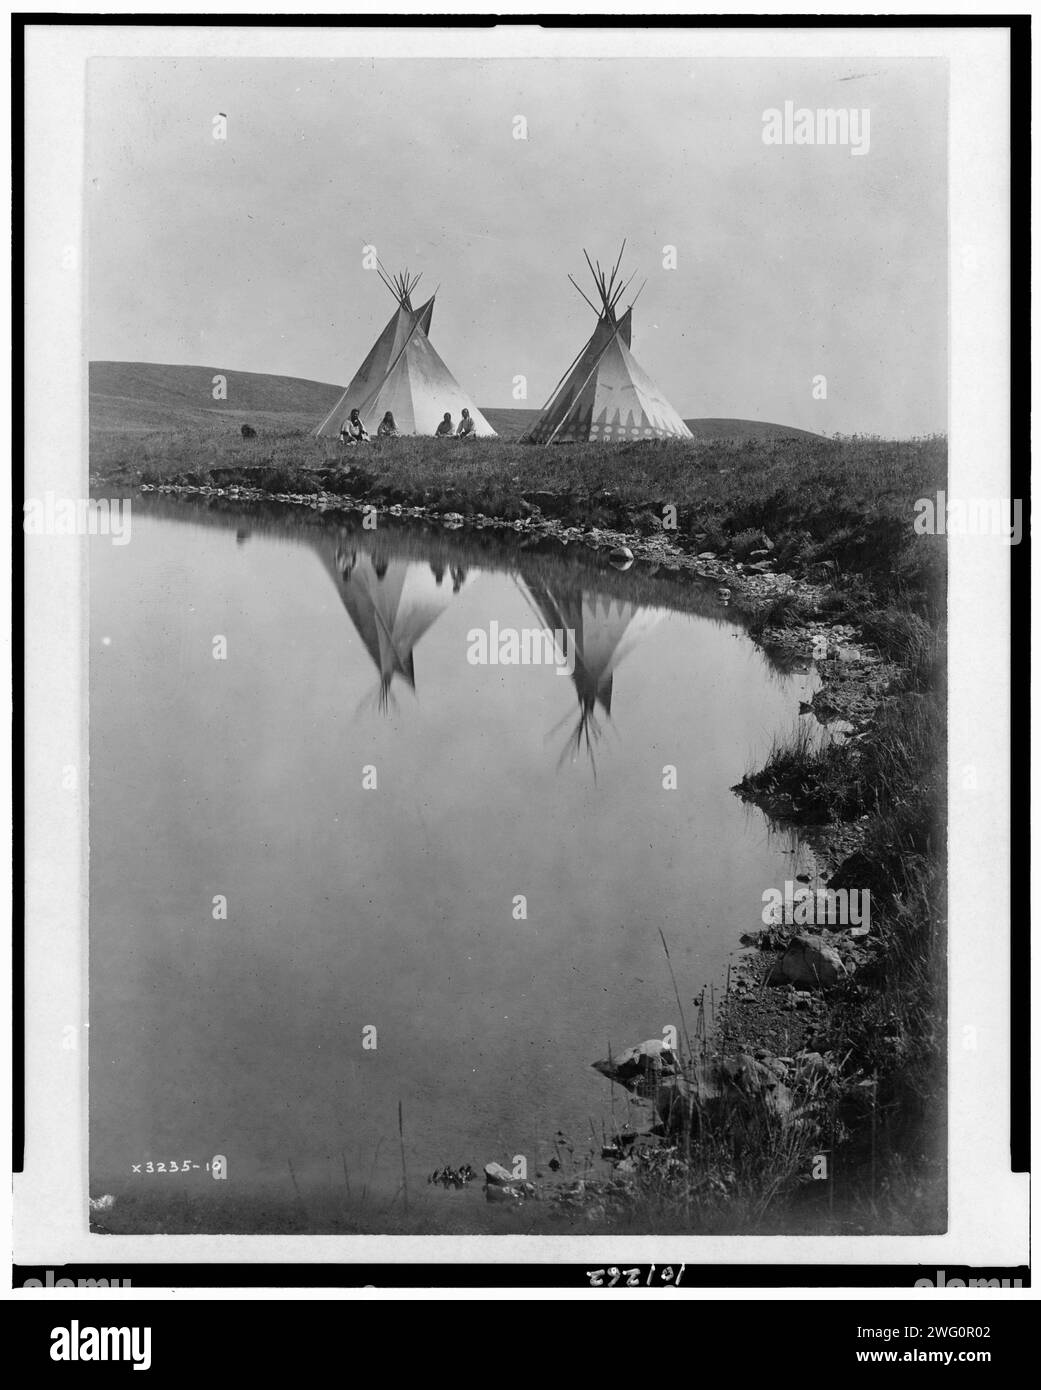 At the water's edge-Piegan, c1910. Photo shows two tepees reflected in water of pond, with four Piegan Indians seated in front of one tepee. Stock Photo